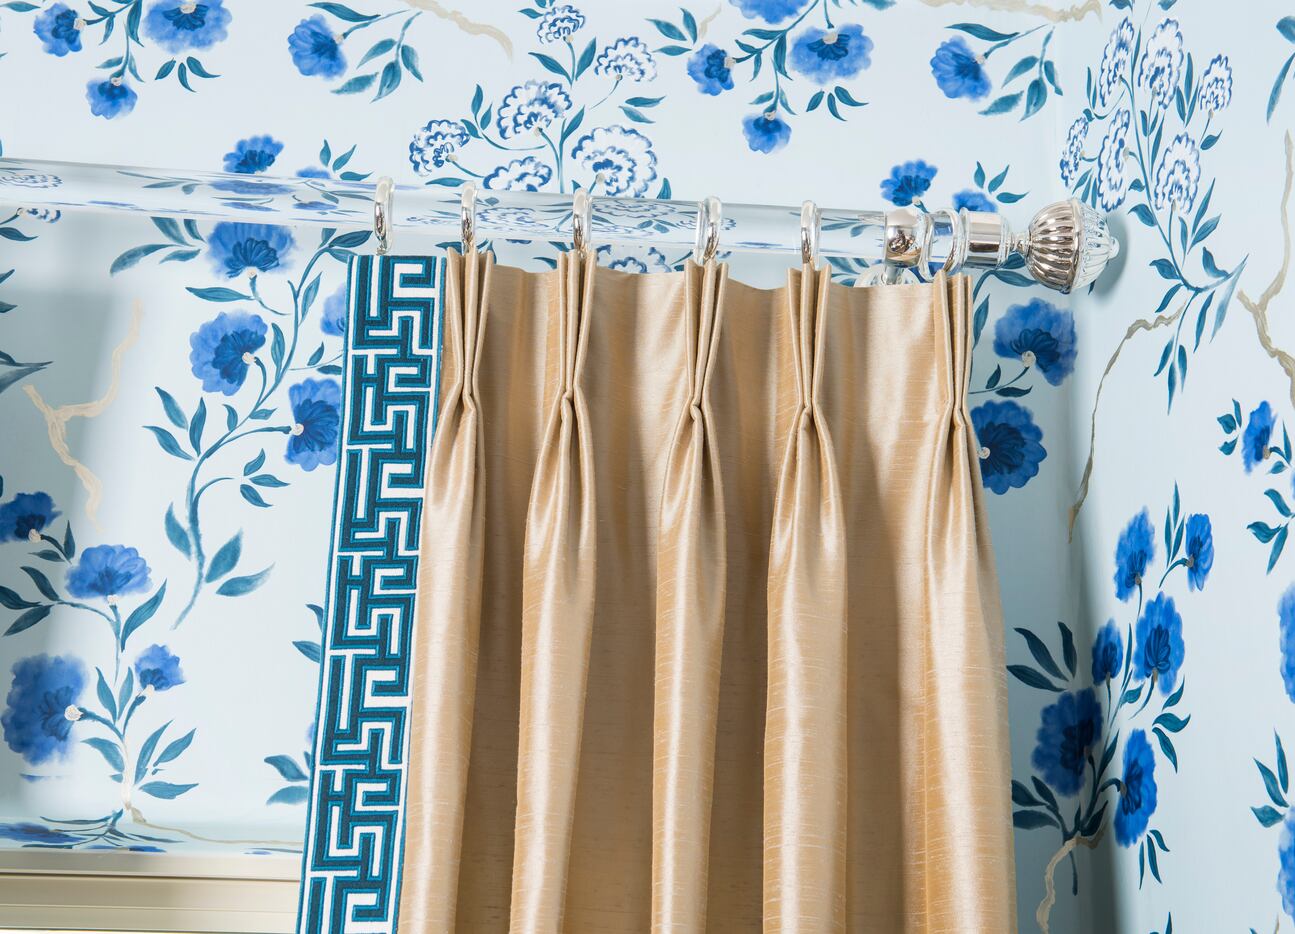 Use drapery panels in a space to add beauty and dimension through pattern and texture, says...